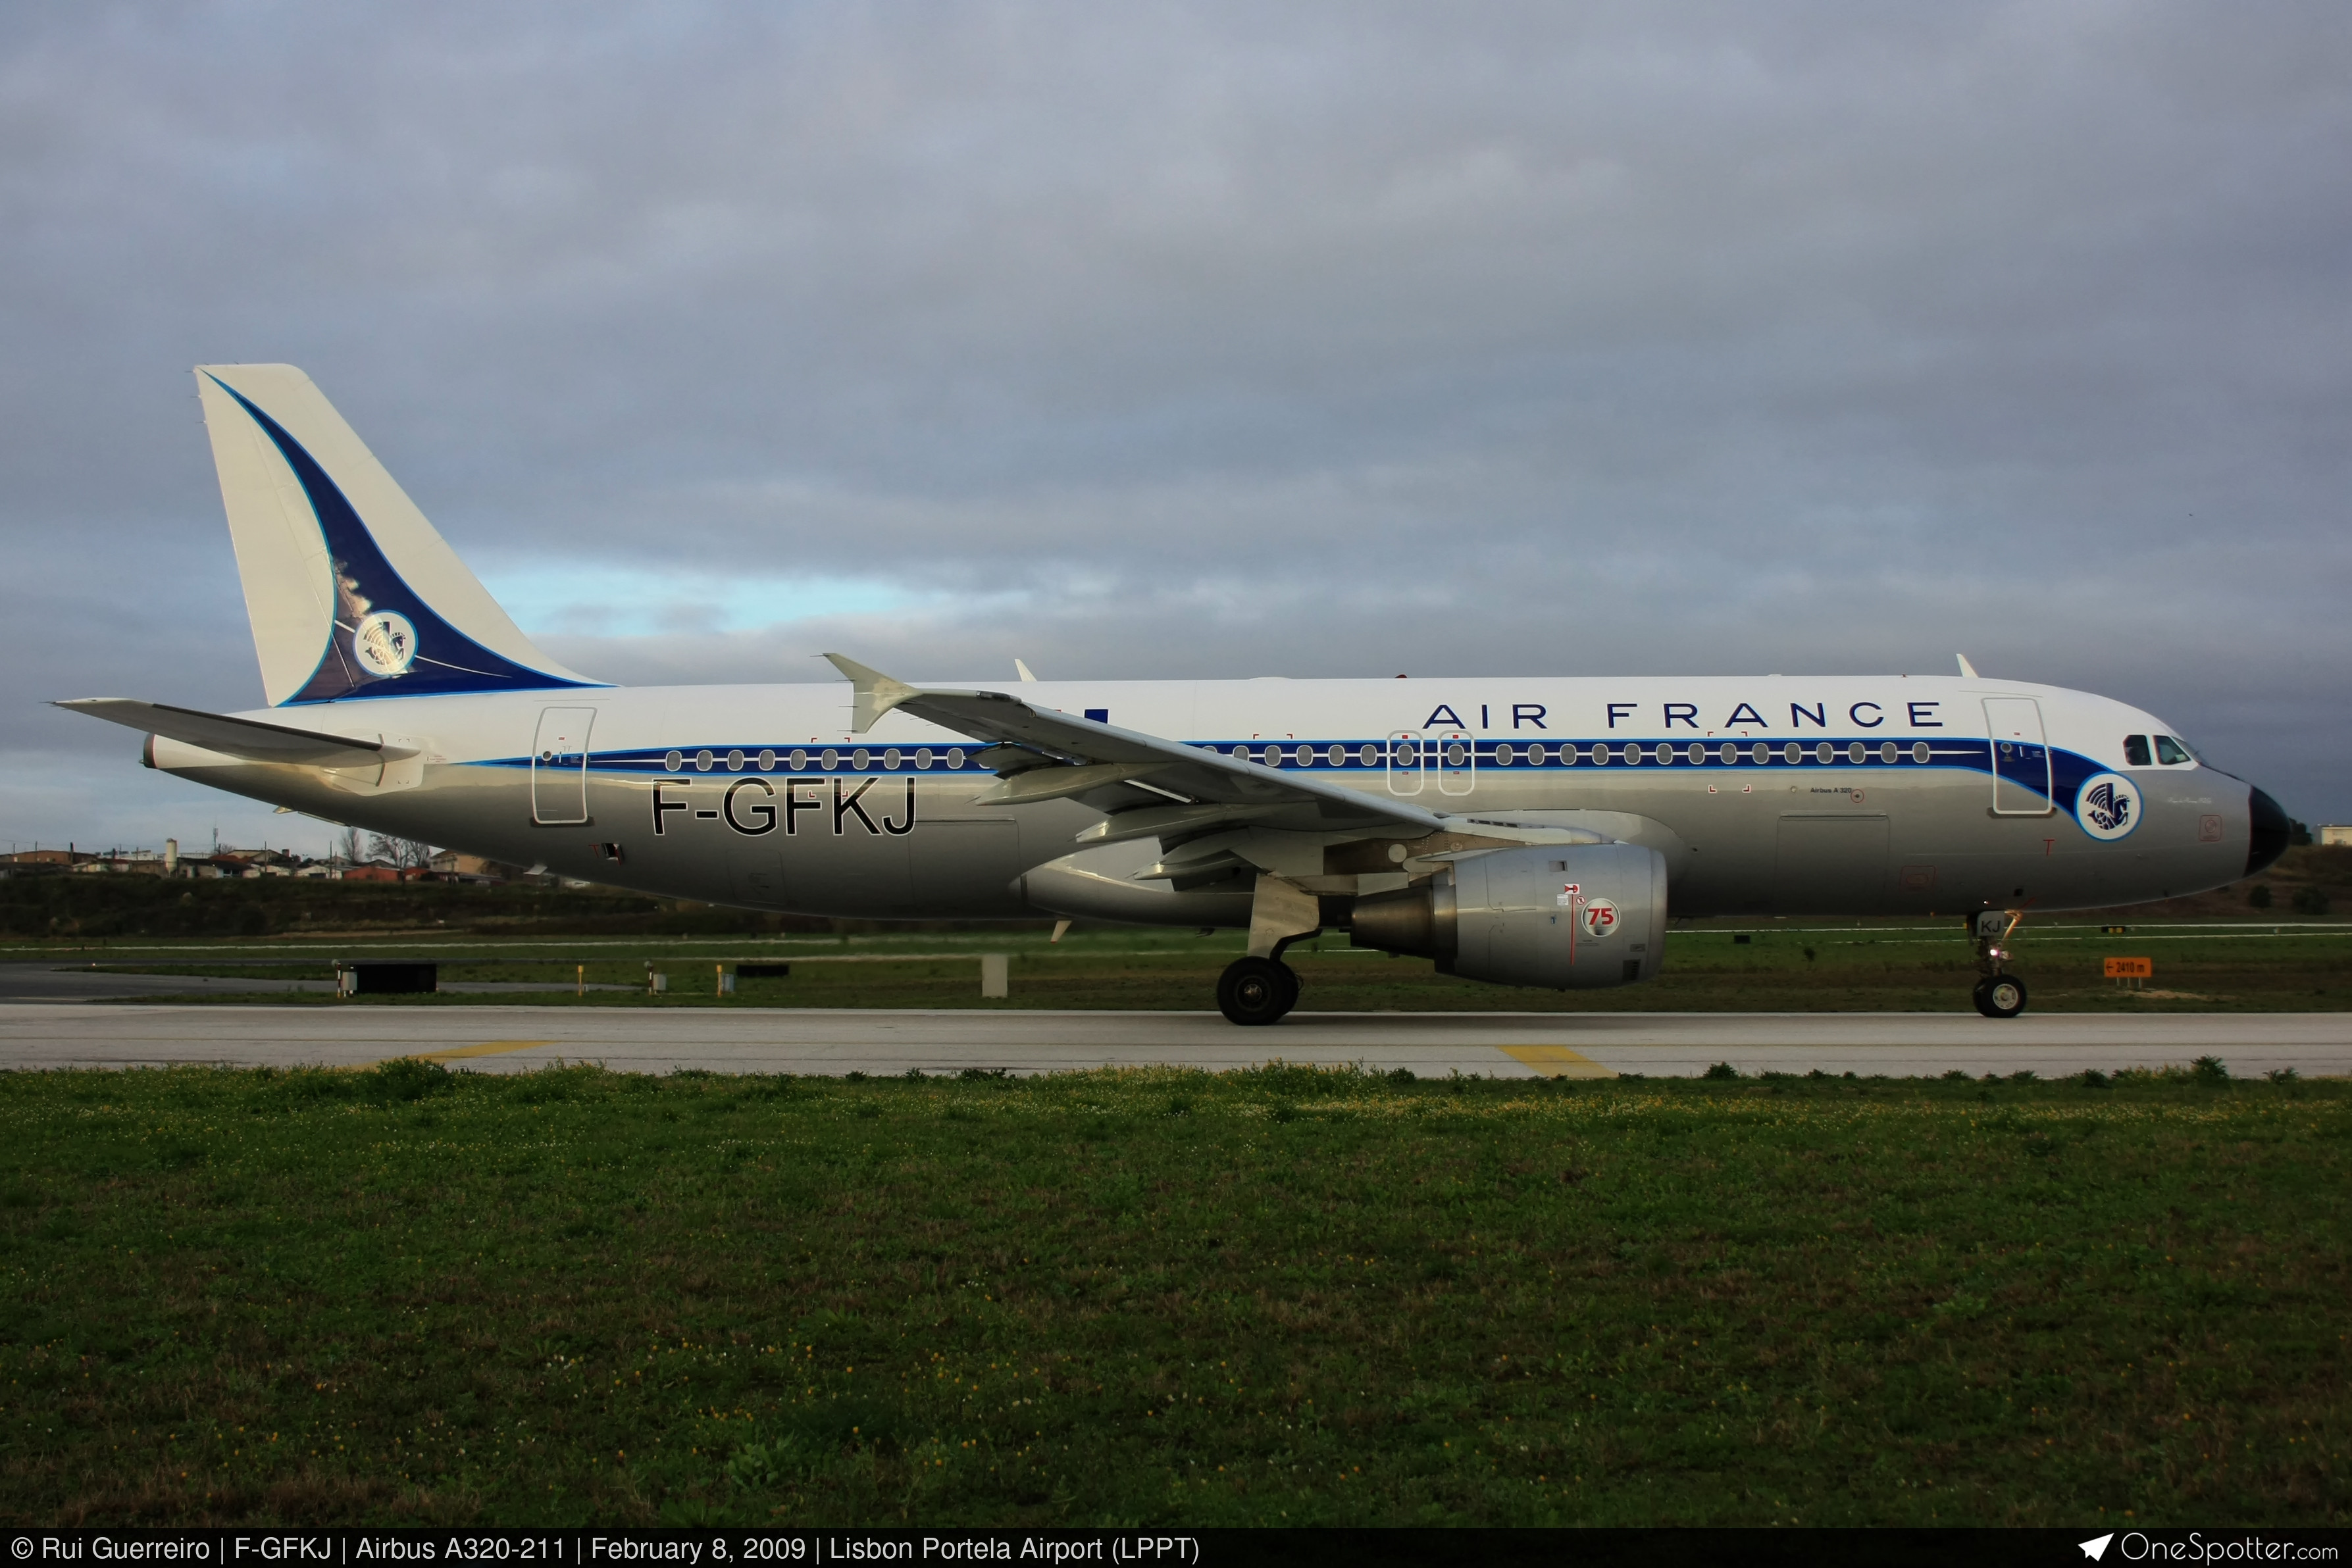 Air France Airbus A320 France 1998 Netherlands / Italy F-GFKU